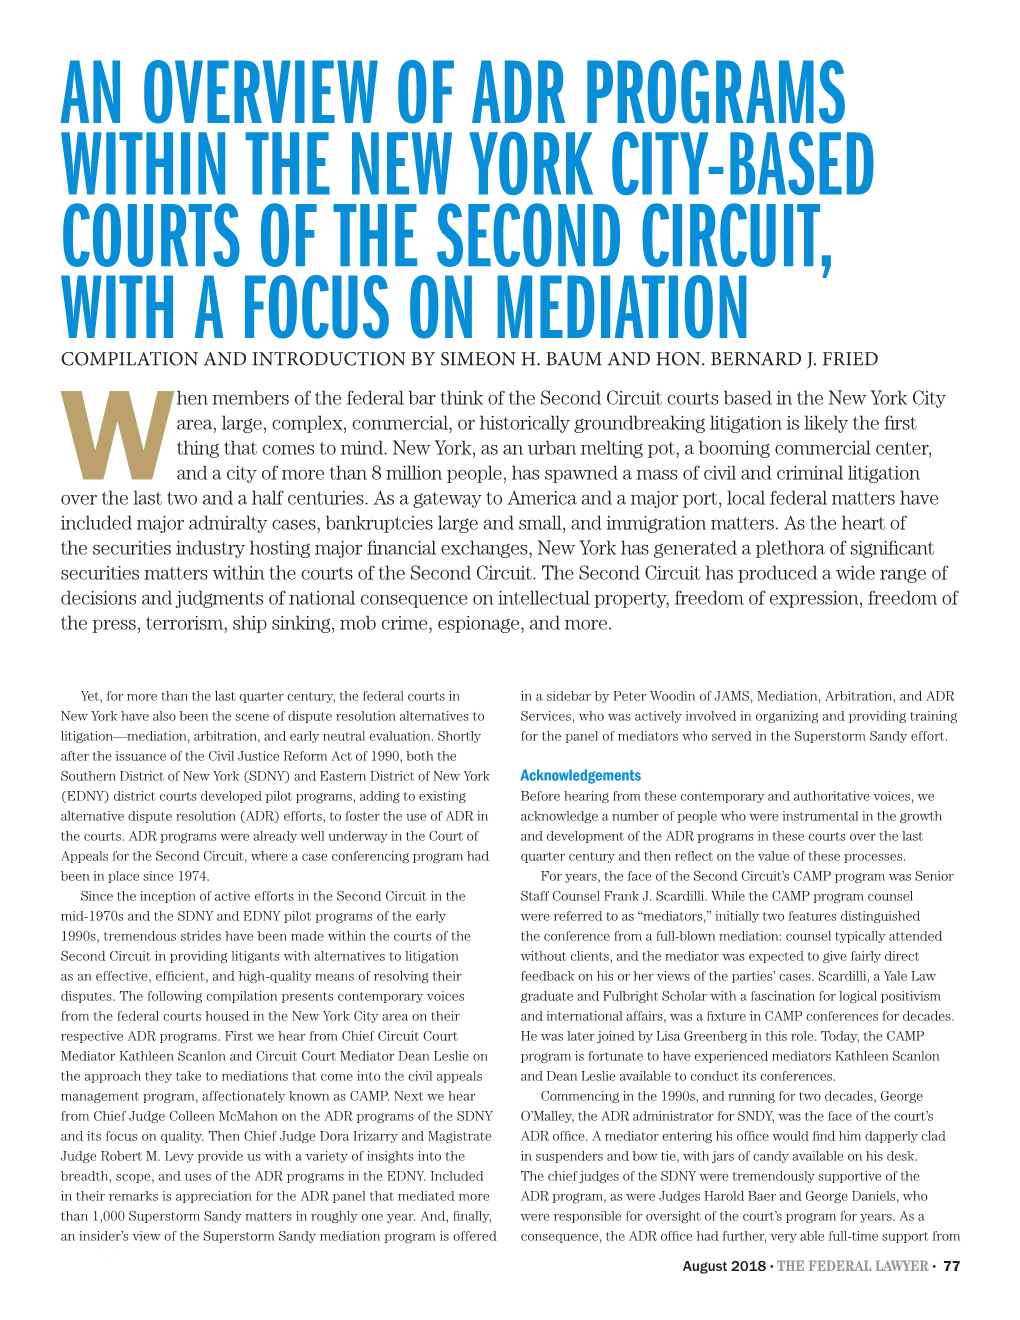 An Overview of Adr Programs Within the New York City-Based Courts of the Second Circuit, with a Focus on Mediation Compilation and Introduction by Simeon H